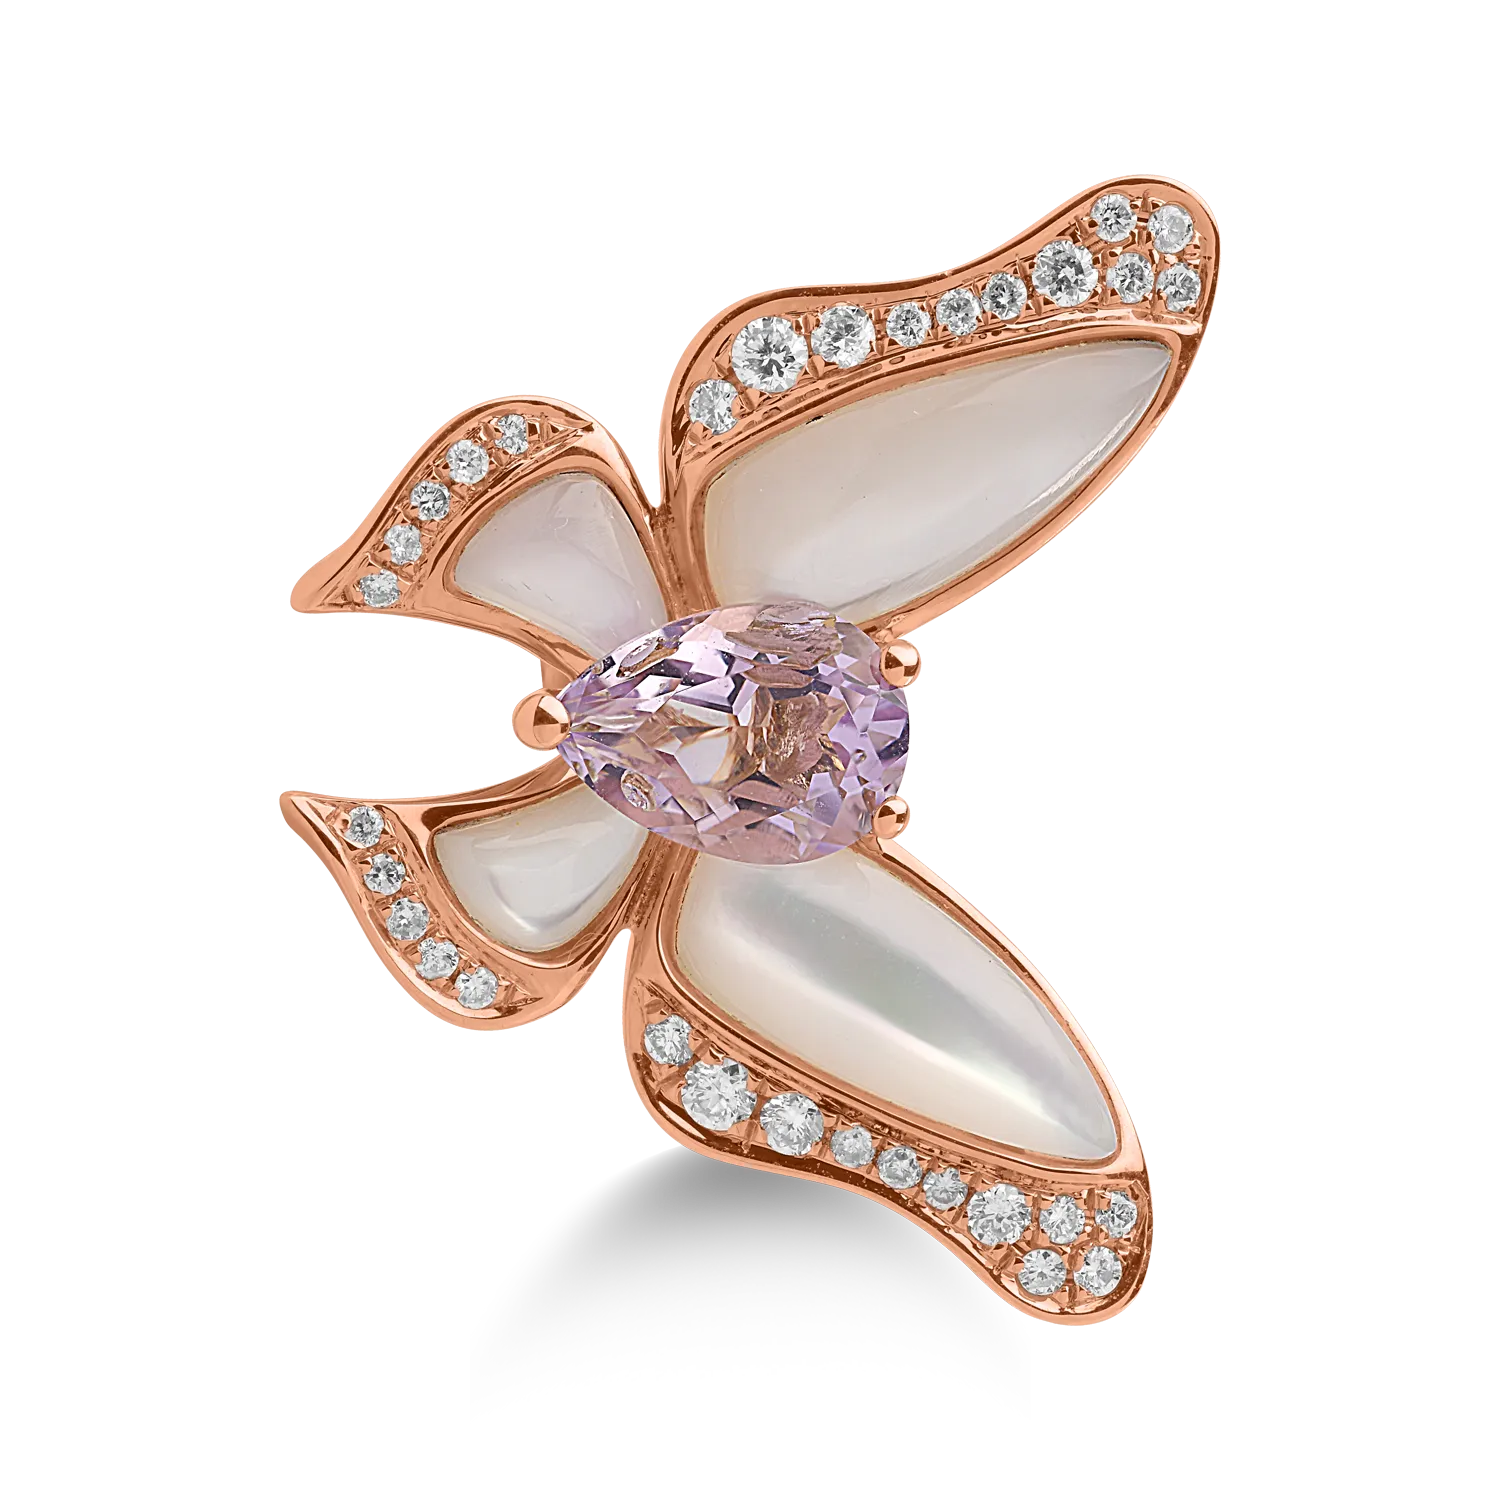 18K rose gold butterfly ring with 5.08ct precious and semiprecious stones